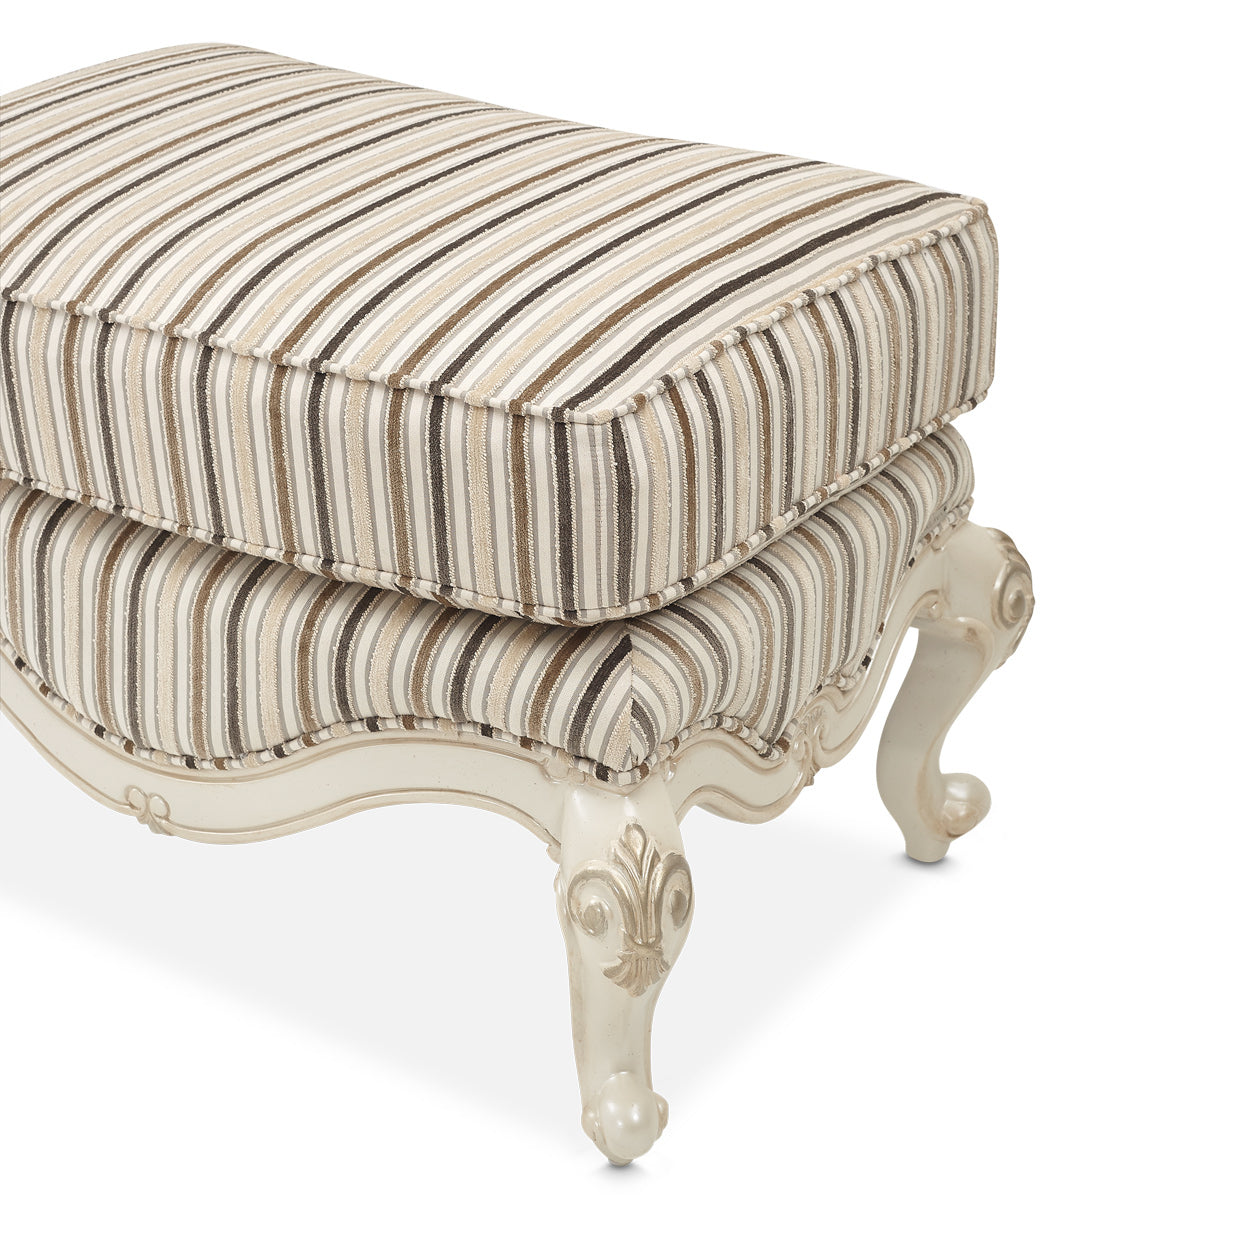 LAVELLE-CLASSIC PEARL Lavelle Wood Chair Ottoman Birch Classic Pearl - Dream art Gallery